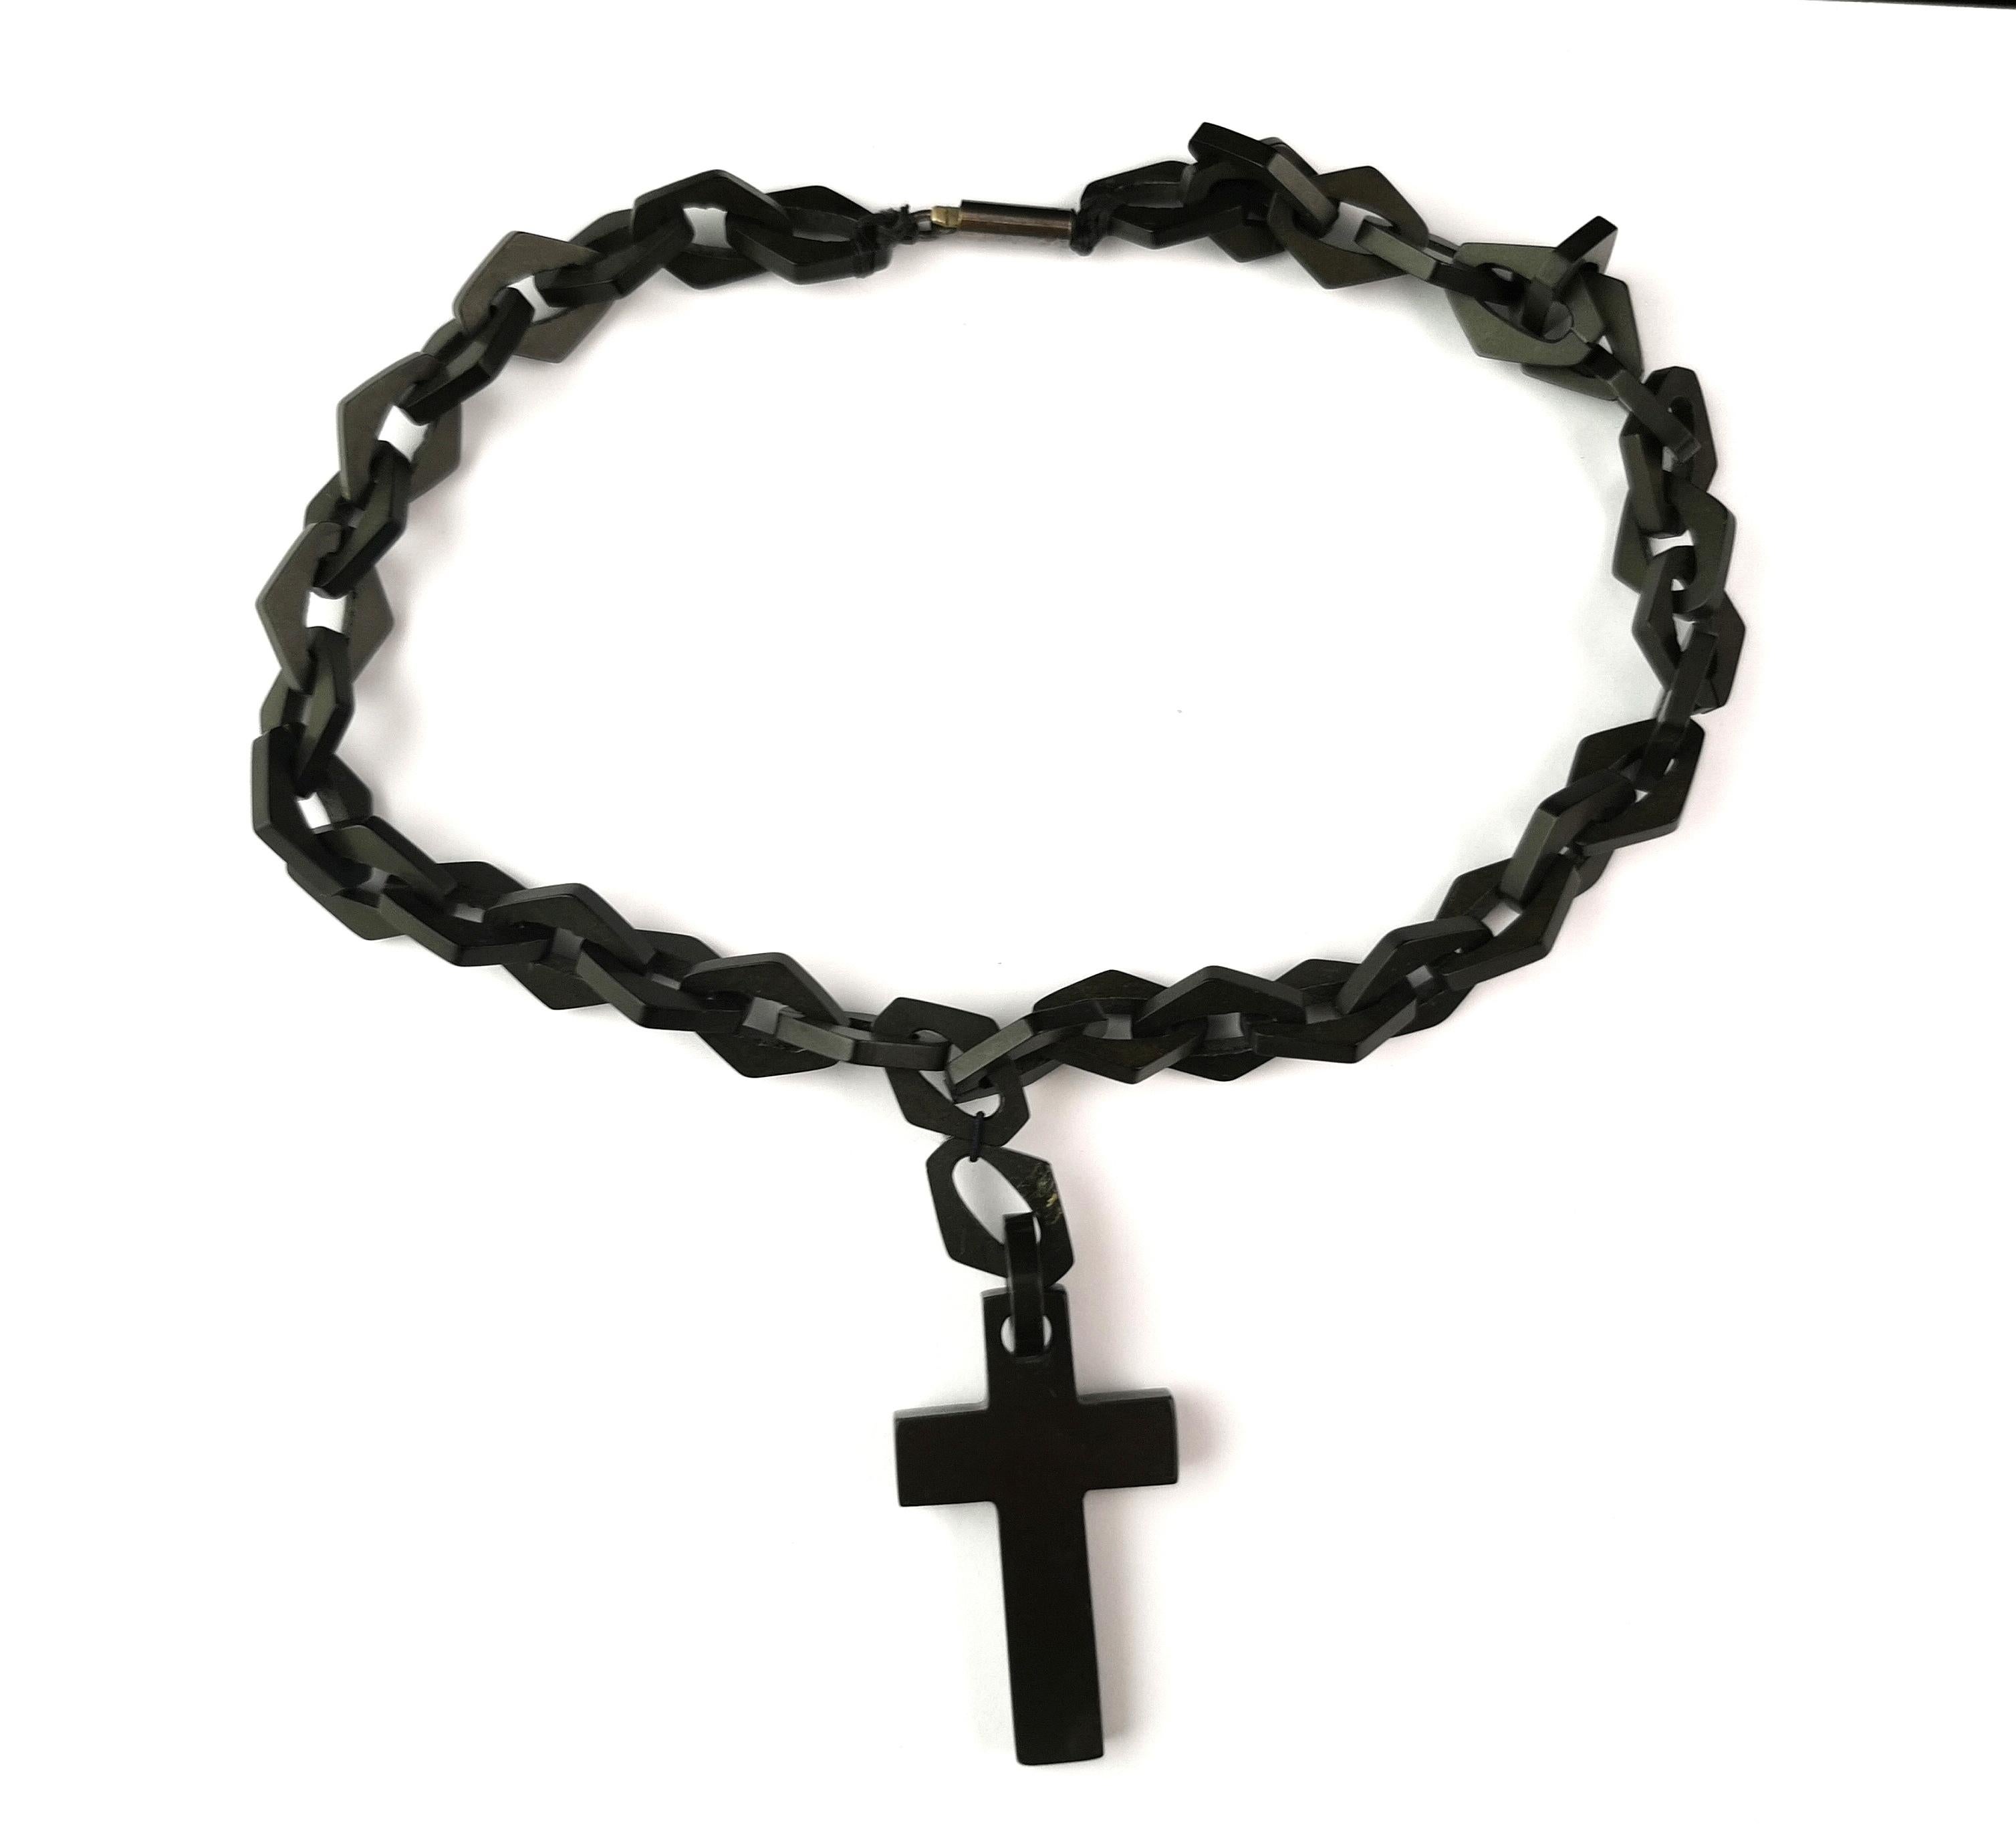 An attractive and unusual antique Victorian Vulcanite Cross and chain necklace.

The necklace features large, chunky, fancy mariner style Links, interlocking along the length and it fastens with a barrel clasp which is a later addition.

The cross